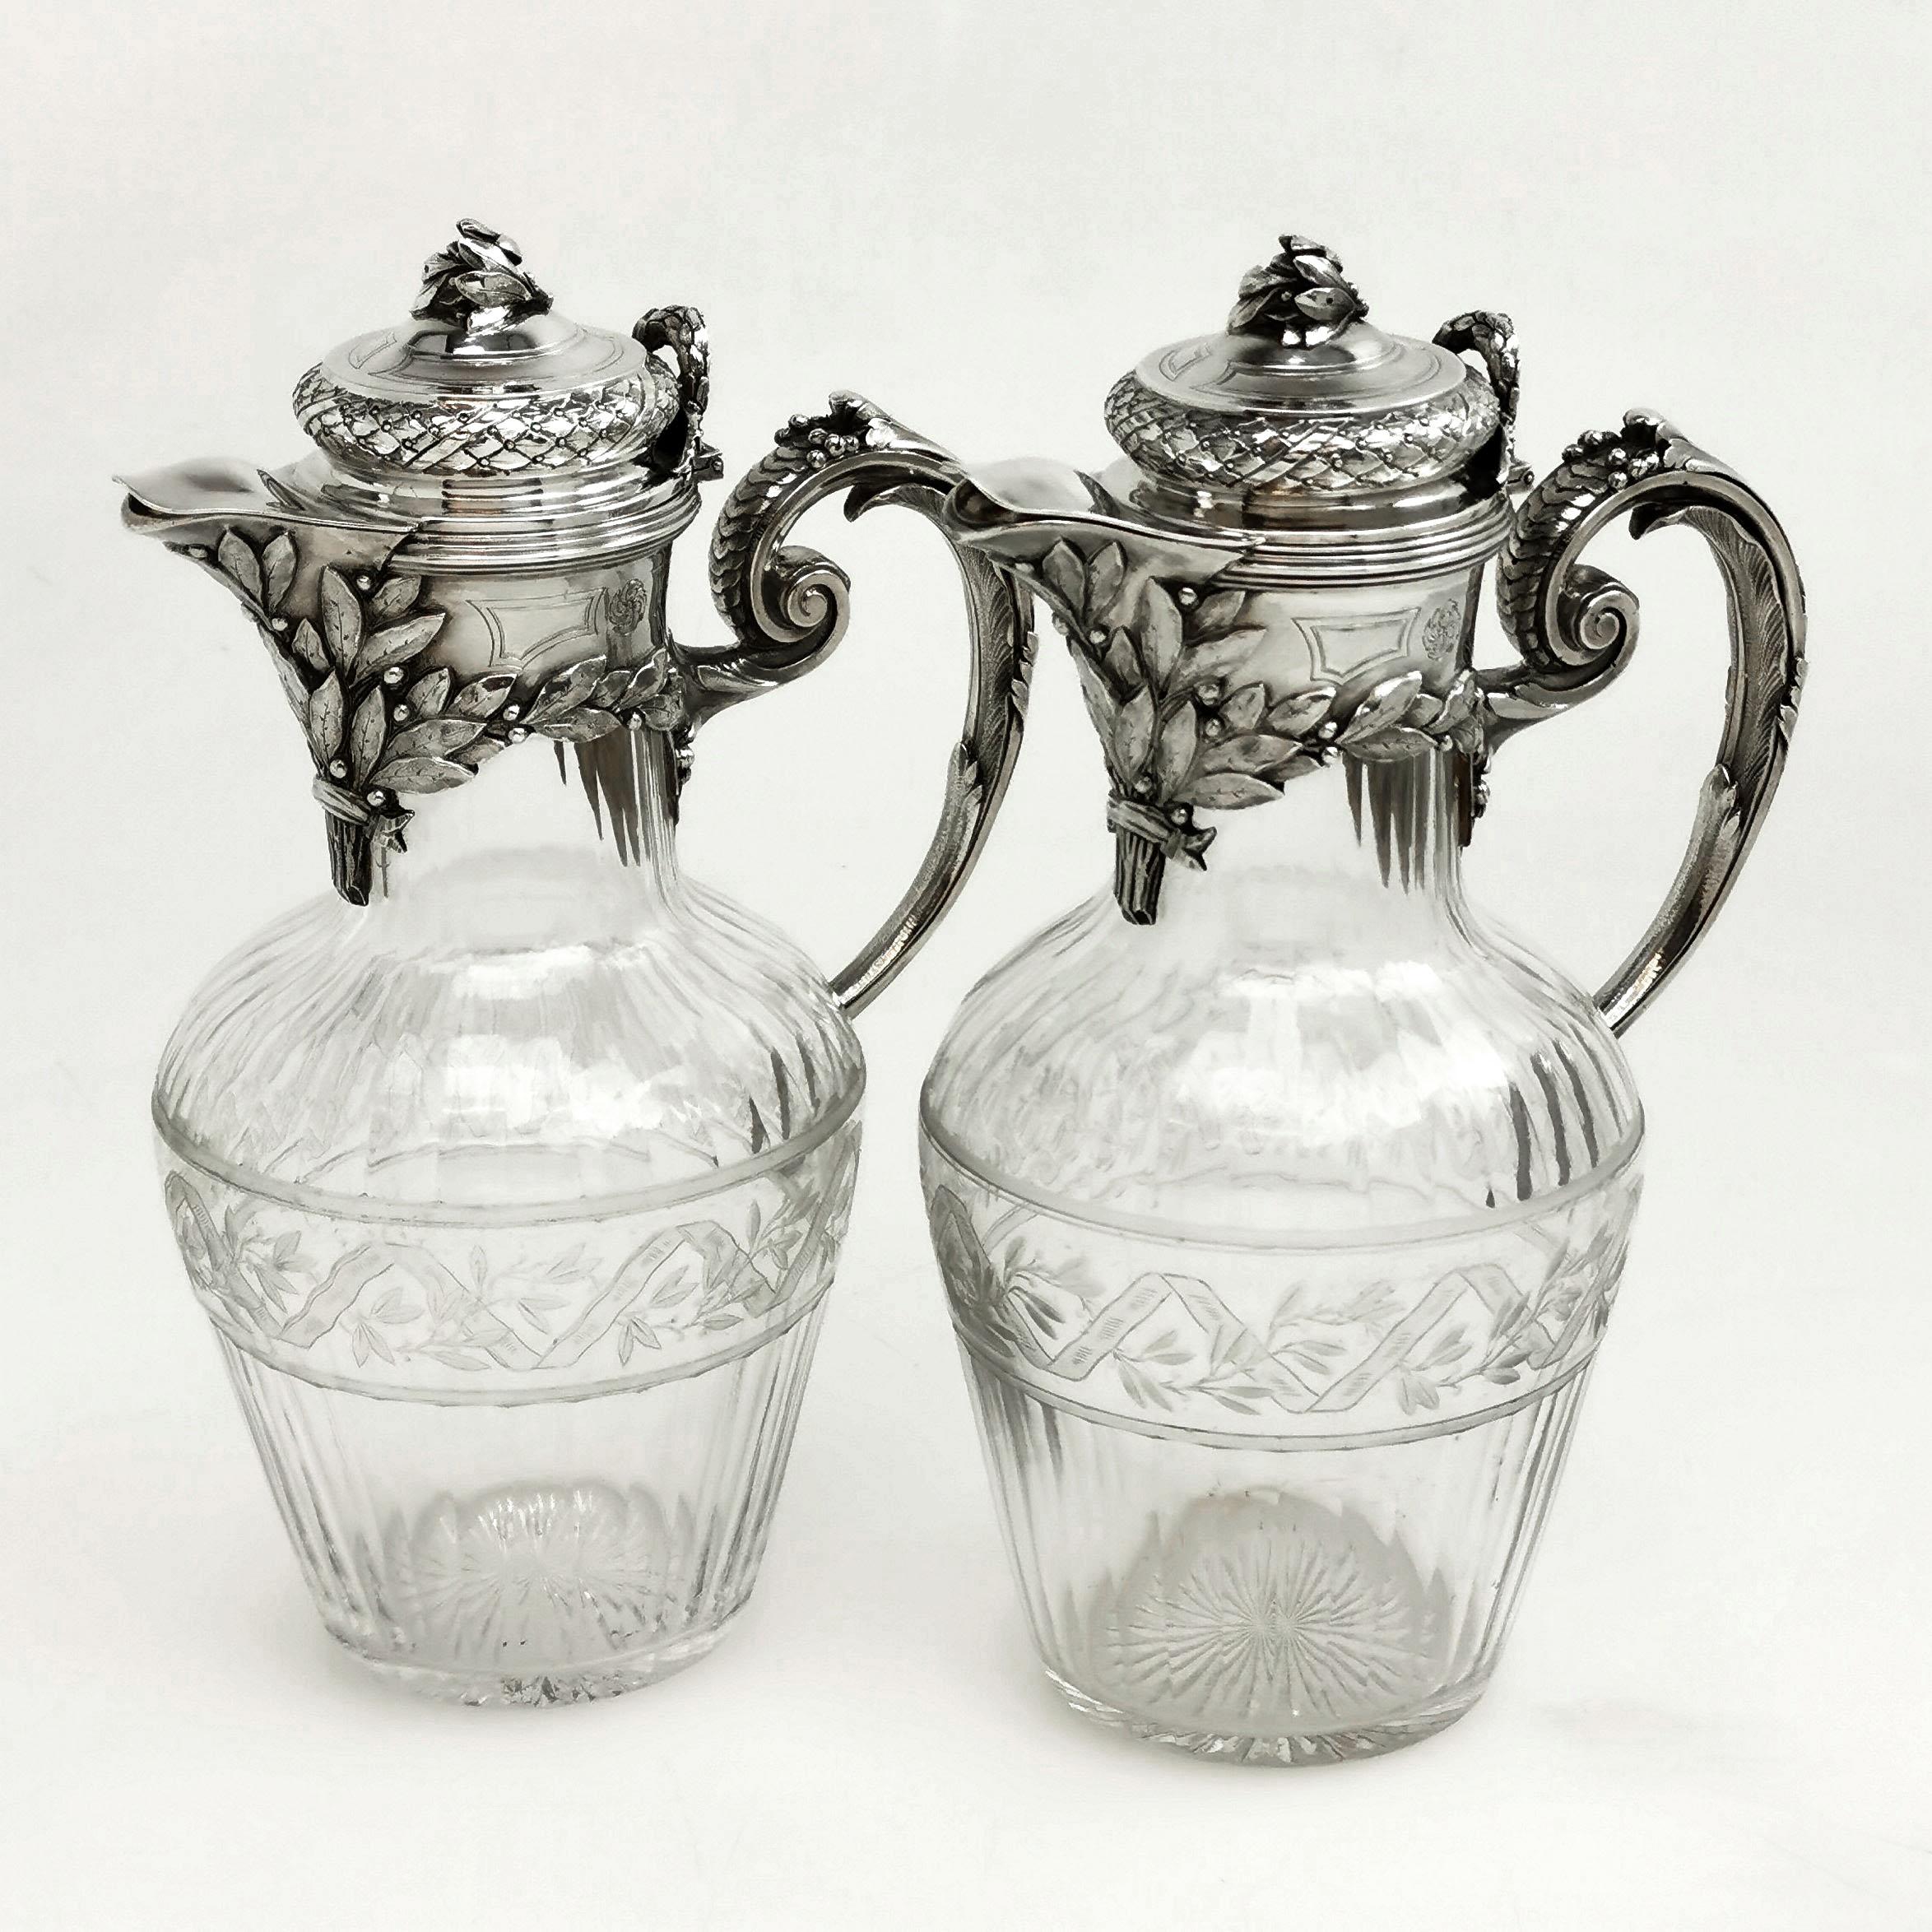 A beautiful pair of antique solid silver and cut glass claret jugs. The silver mounts on the Jugs are embellished with ornate design elements including a bundle of chased leaves below the spouts and leaves on the finial. This leaf theme is continued